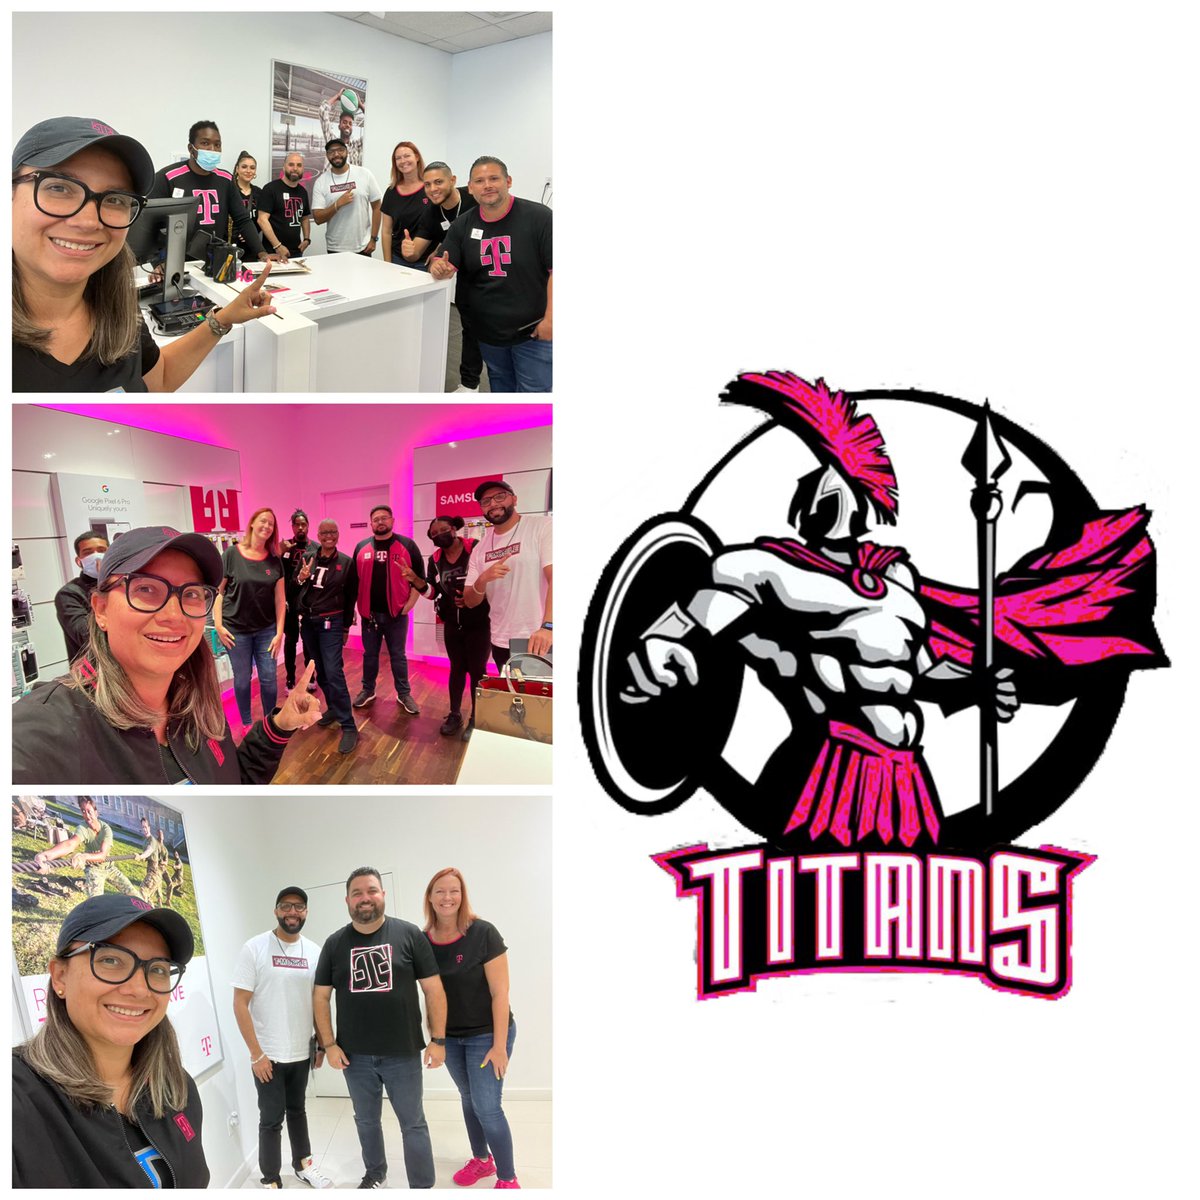 Awesome partnerships great visits and knowledge dropping that is how I love to spend my Friday’s thank you @Ovais_L @JenPatino11 for helping spread the Home internet love and @WeWontStopJoe so excited to have you in our area welcome to the Titans @pattyc101 @cjgreentx